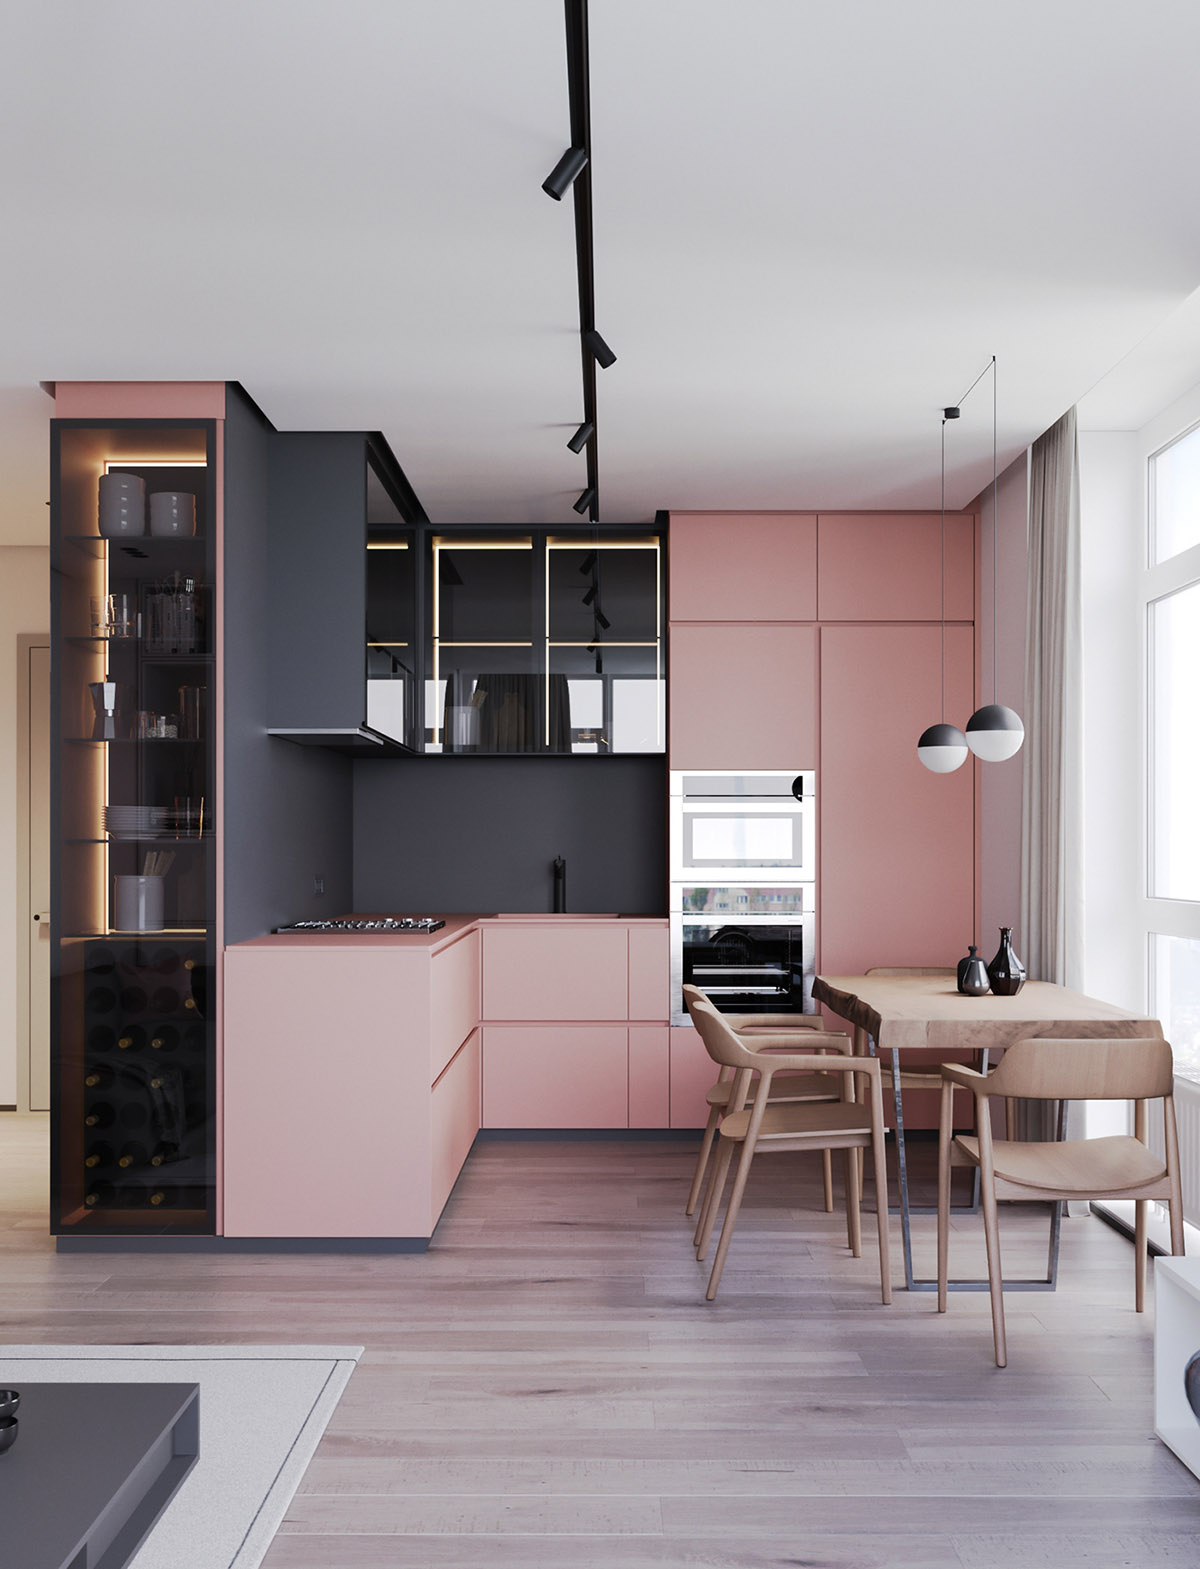 A Striking Example Of Interior Design Using Pink & Grey